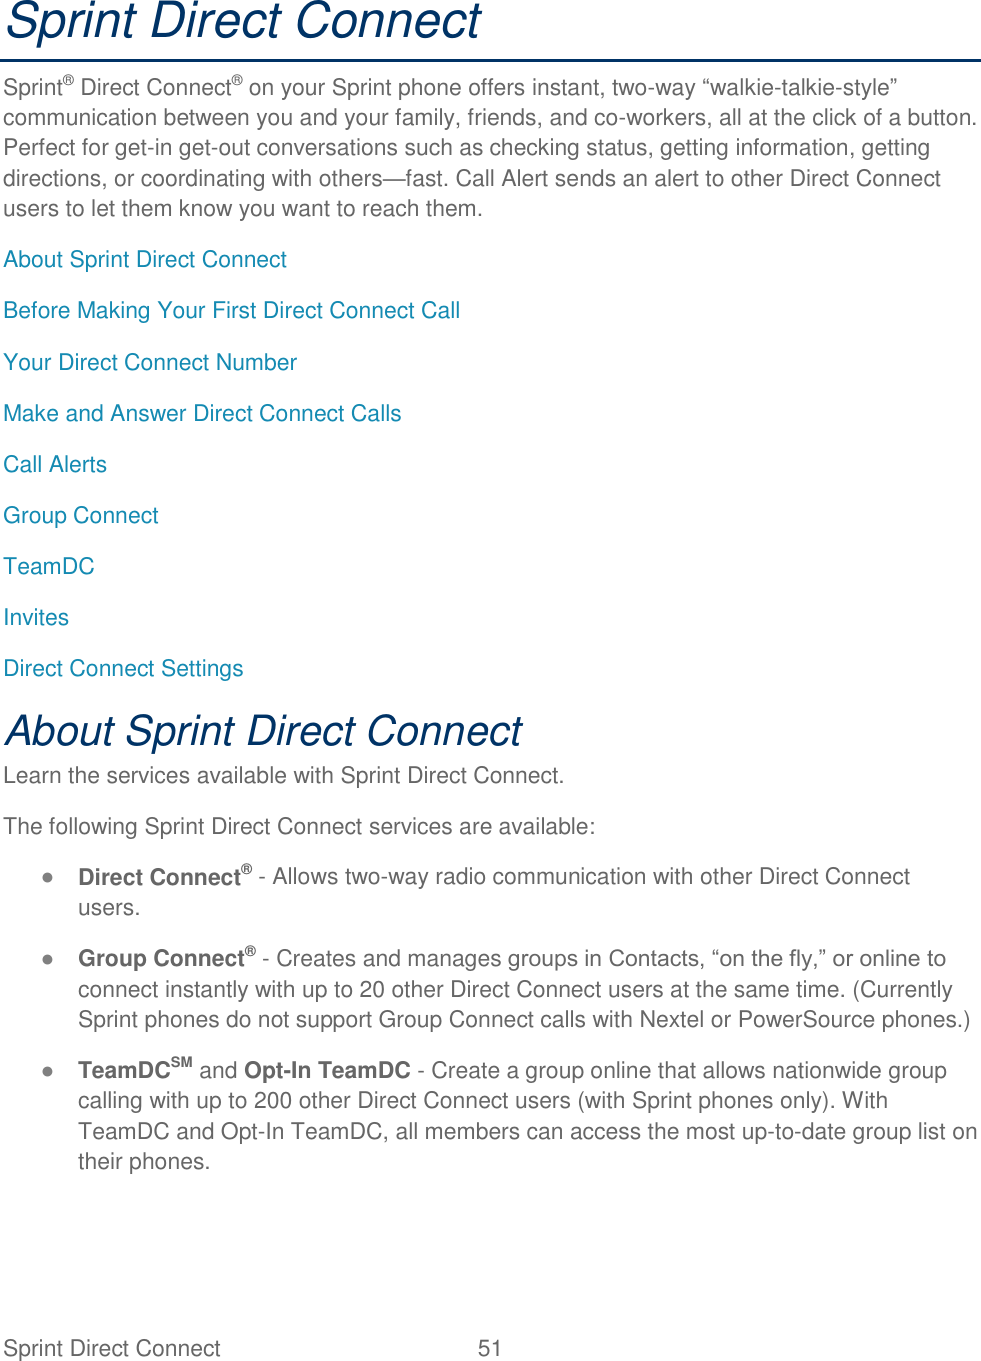 Sprint Direct Connect  51   Sprint Direct Connect Sprint® Direct Connect® on your Sprint phone offers instant, two-way “walkie-talkie-style” communication between you and your family, friends, and co-workers, all at the click of a button. Perfect for get-in get-out conversations such as checking status, getting information, getting directions, or coordinating with others—fast. Call Alert sends an alert to other Direct Connect users to let them know you want to reach them. About Sprint Direct Connect Before Making Your First Direct Connect Call Your Direct Connect Number Make and Answer Direct Connect Calls Call Alerts Group Connect TeamDC Invites Direct Connect Settings About Sprint Direct Connect Learn the services available with Sprint Direct Connect. The following Sprint Direct Connect services are available: ● Direct Connect® - Allows two-way radio communication with other Direct Connect users. ● Group Connect® - Creates and manages groups in Contacts, “on the fly,” or online to connect instantly with up to 20 other Direct Connect users at the same time. (Currently Sprint phones do not support Group Connect calls with Nextel or PowerSource phones.) ● TeamDCSM and Opt-In TeamDC - Create a group online that allows nationwide group calling with up to 200 other Direct Connect users (with Sprint phones only). With TeamDC and Opt-In TeamDC, all members can access the most up-to-date group list on their phones. 